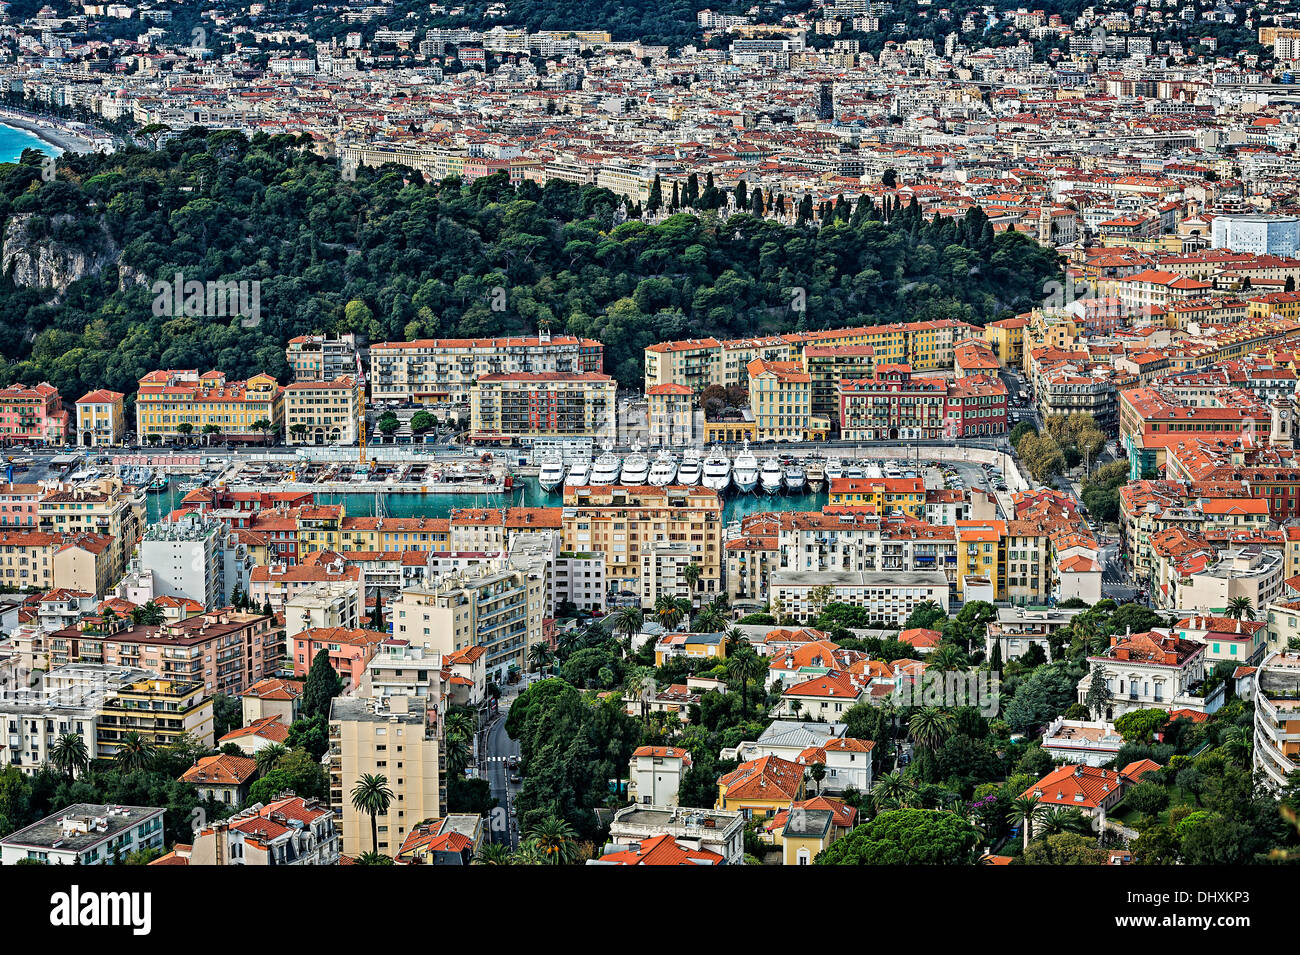 Aerial view of the French city of Nice, French Riviera, Côte d'Azur, France, Europe Stock Photo